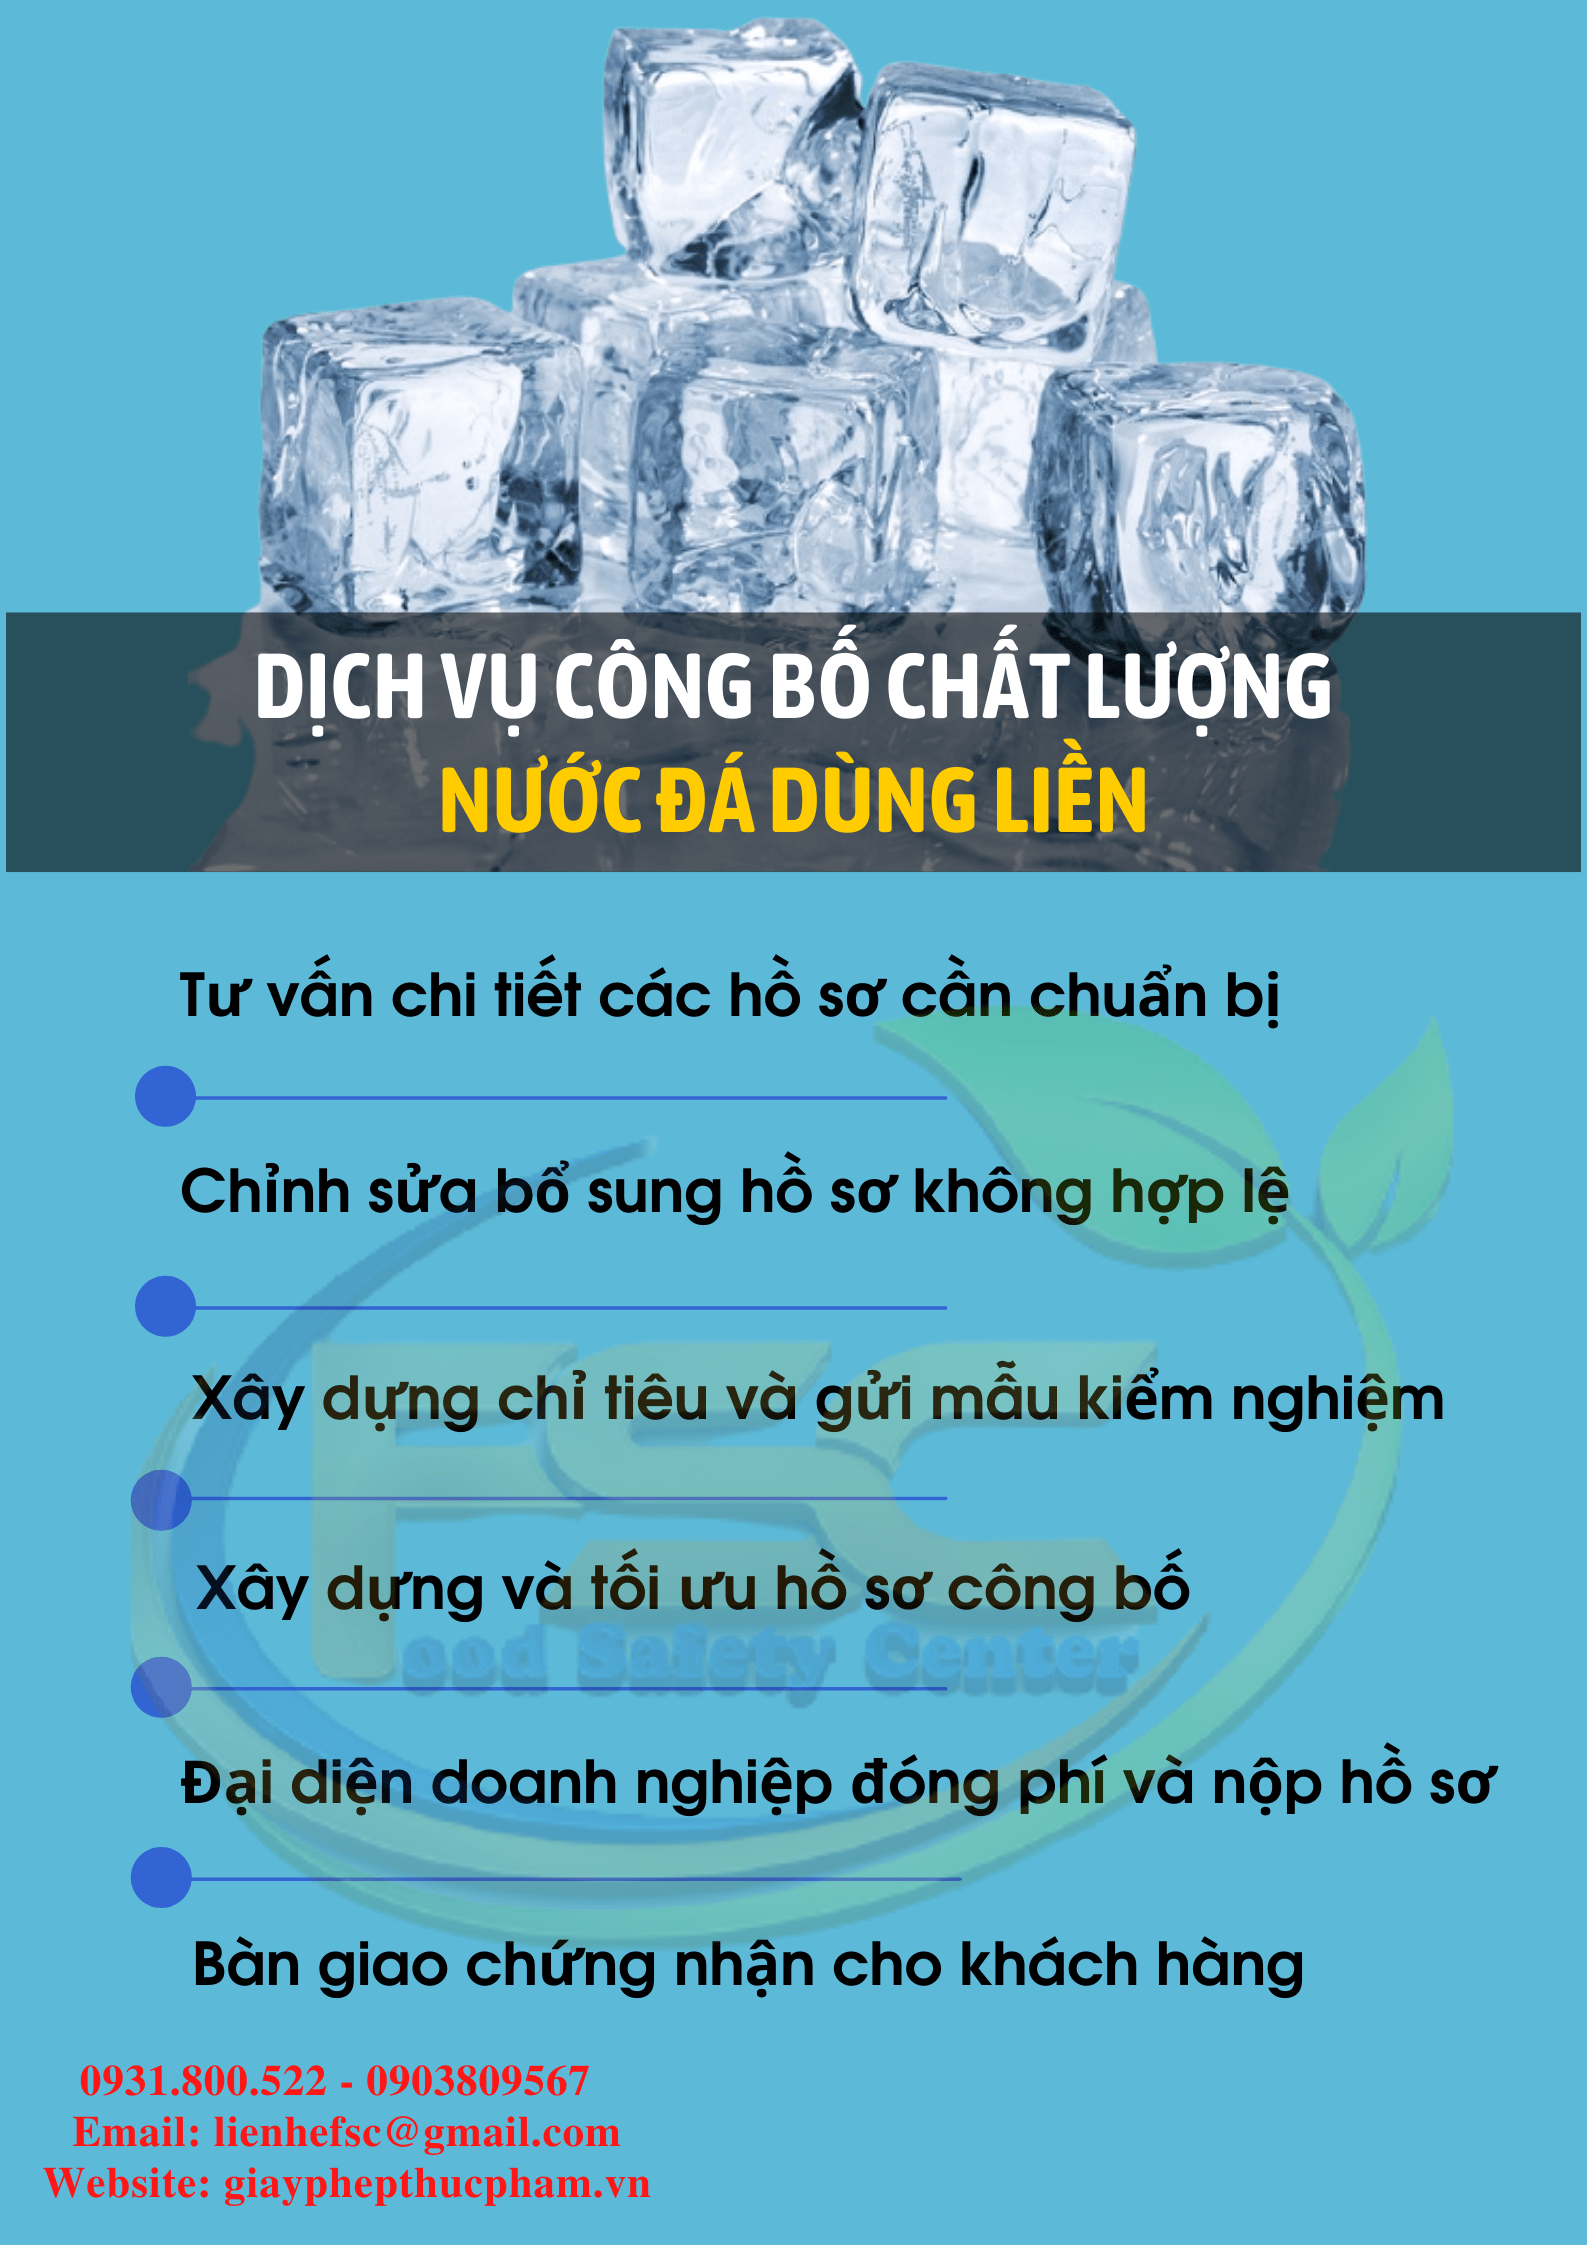 cong-bo-chat-luong-nuoc-da-dung-lien